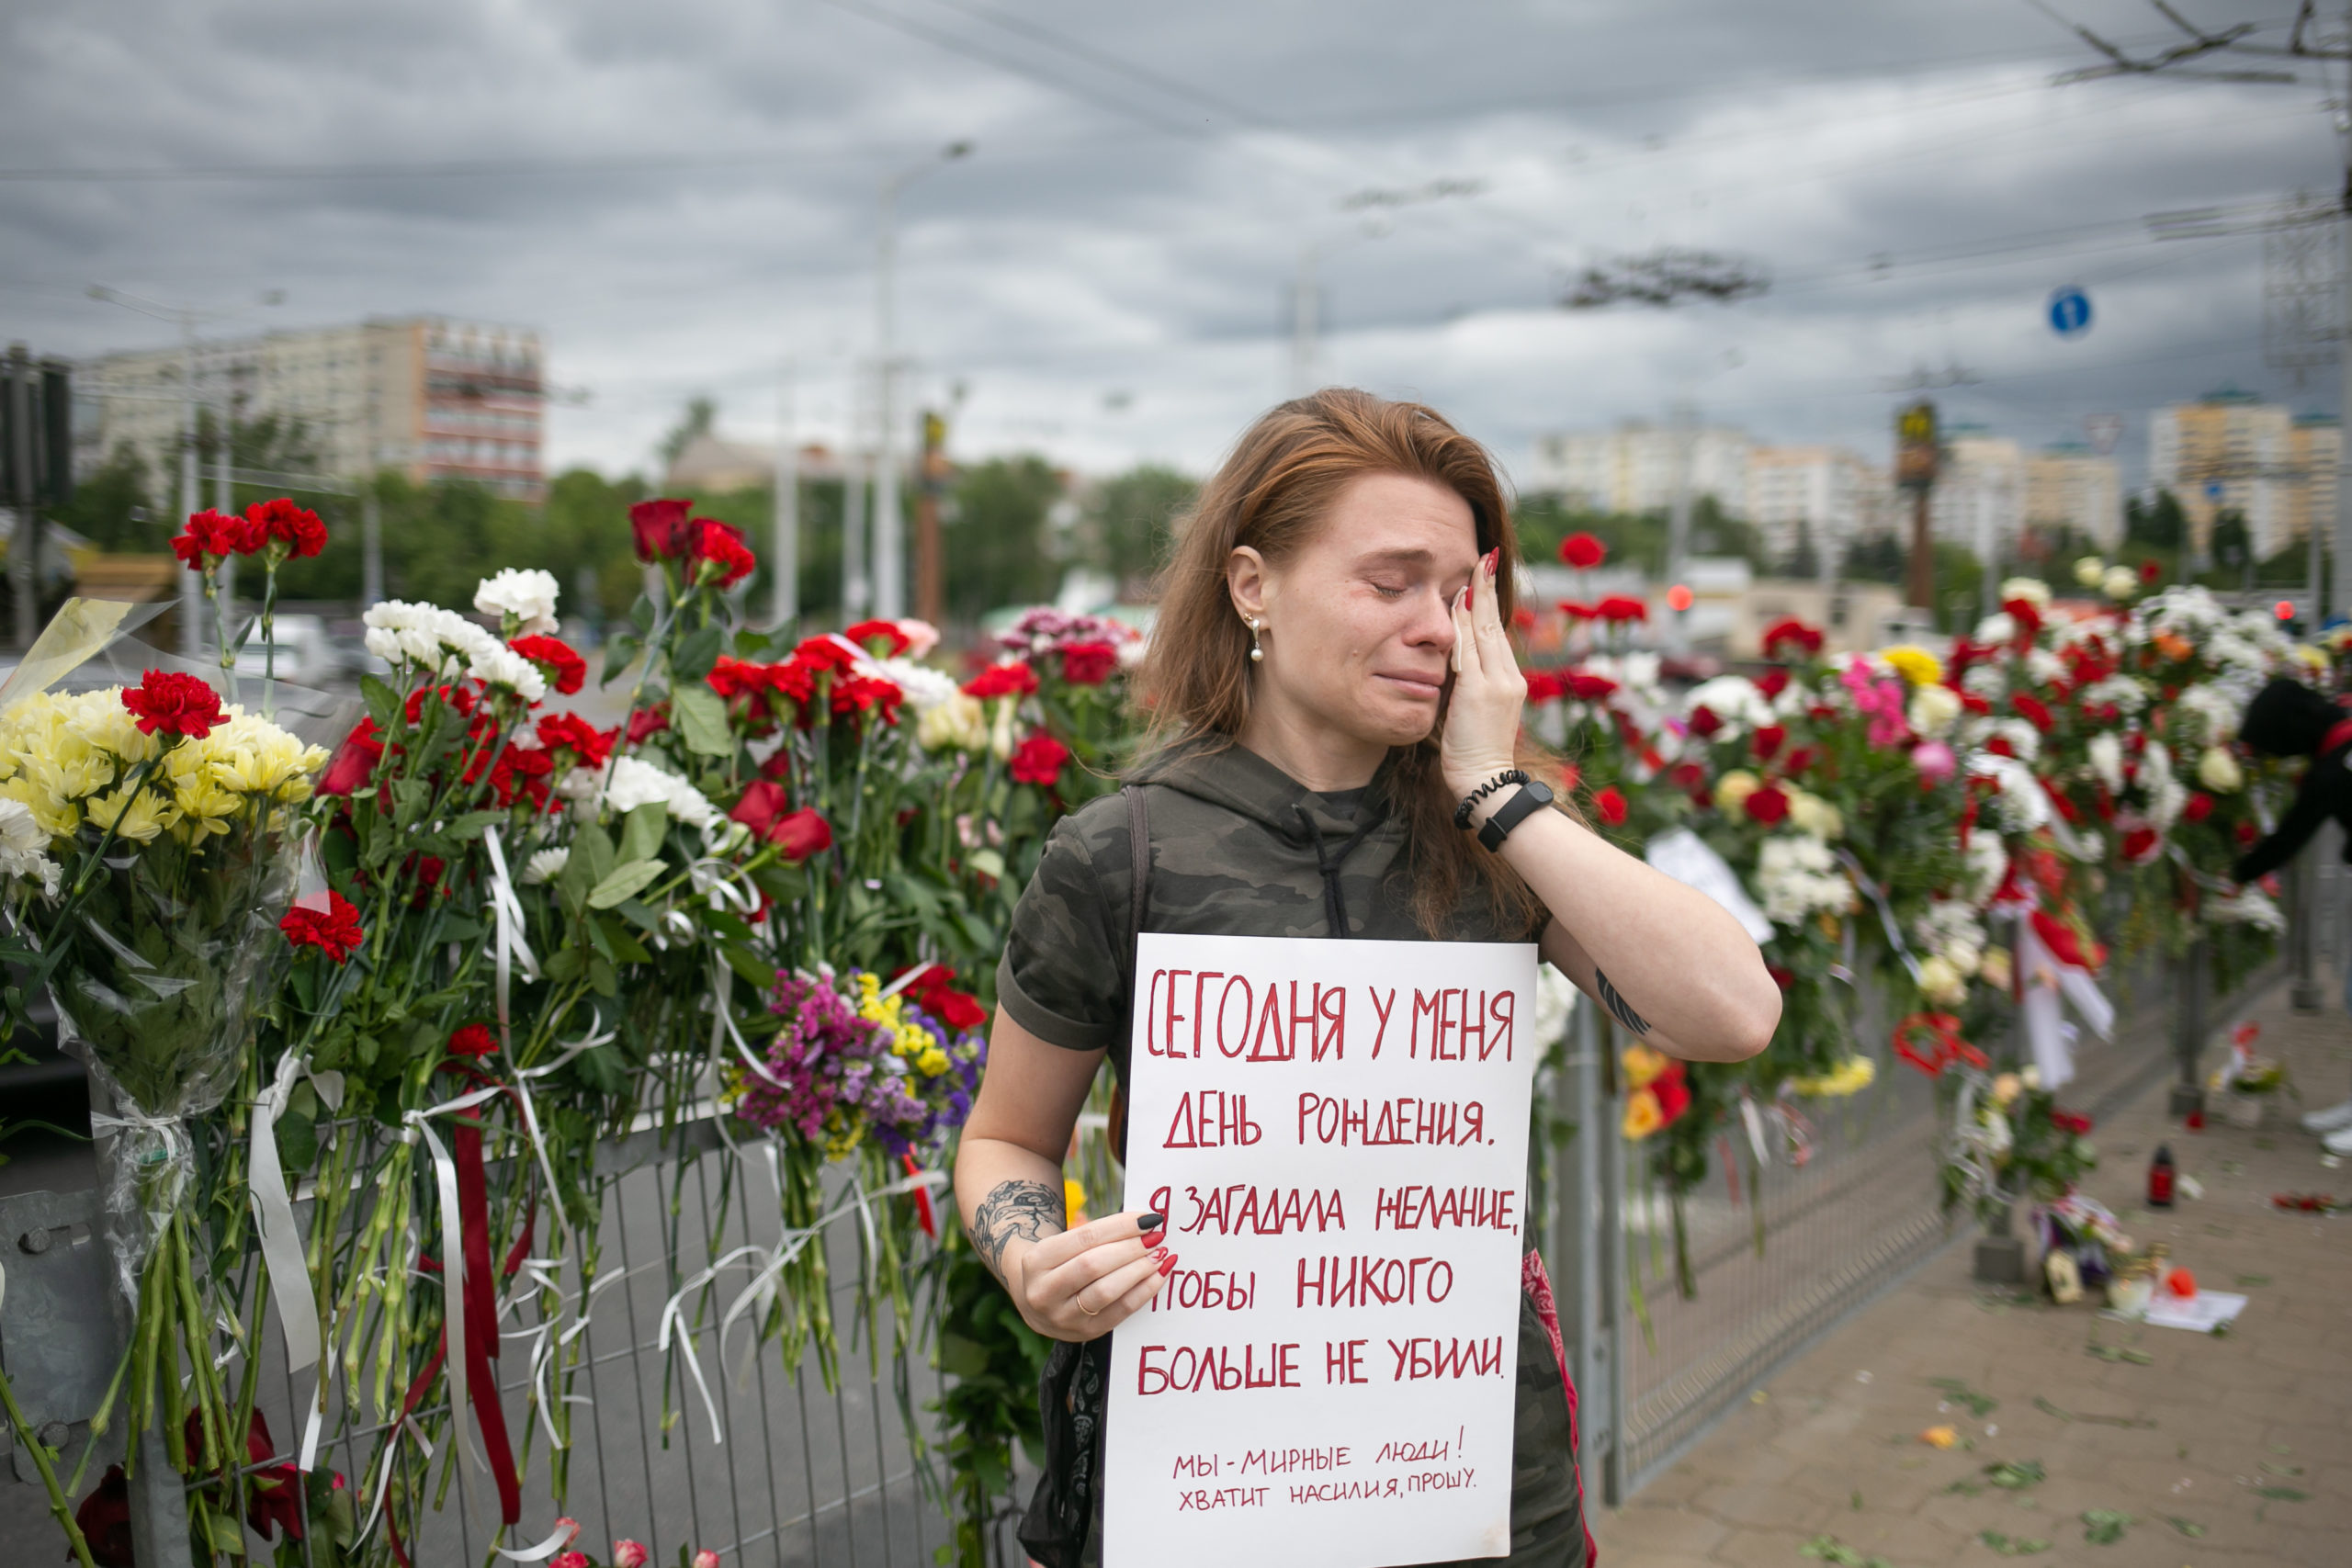 A young woman cries near the popular memorial in honor of Aleksandr Taraikovsky, a protester murdered by the police. Her poster says “Today is my birthday. I wish they don't kill anyone else. We are peaceful people! No more violence, I beg”. Minsk, August 2020.